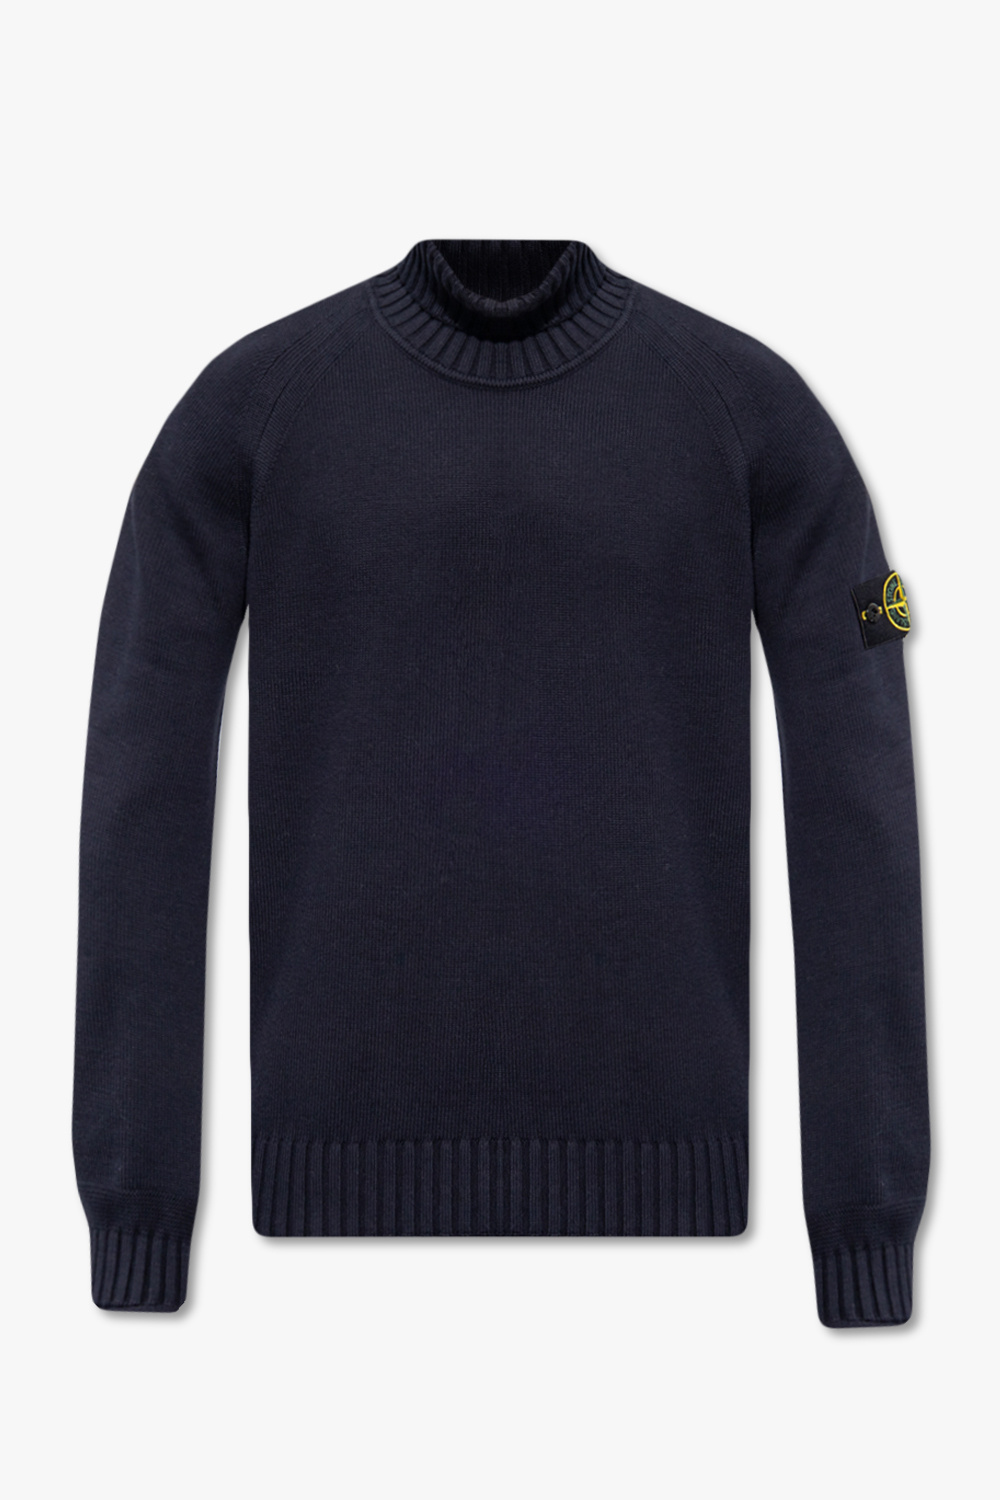 Stone Island Long Sleeve Wool Turtleneck Sweater in White for Men Mens Clothing Sweaters and knitwear Turtlenecks 